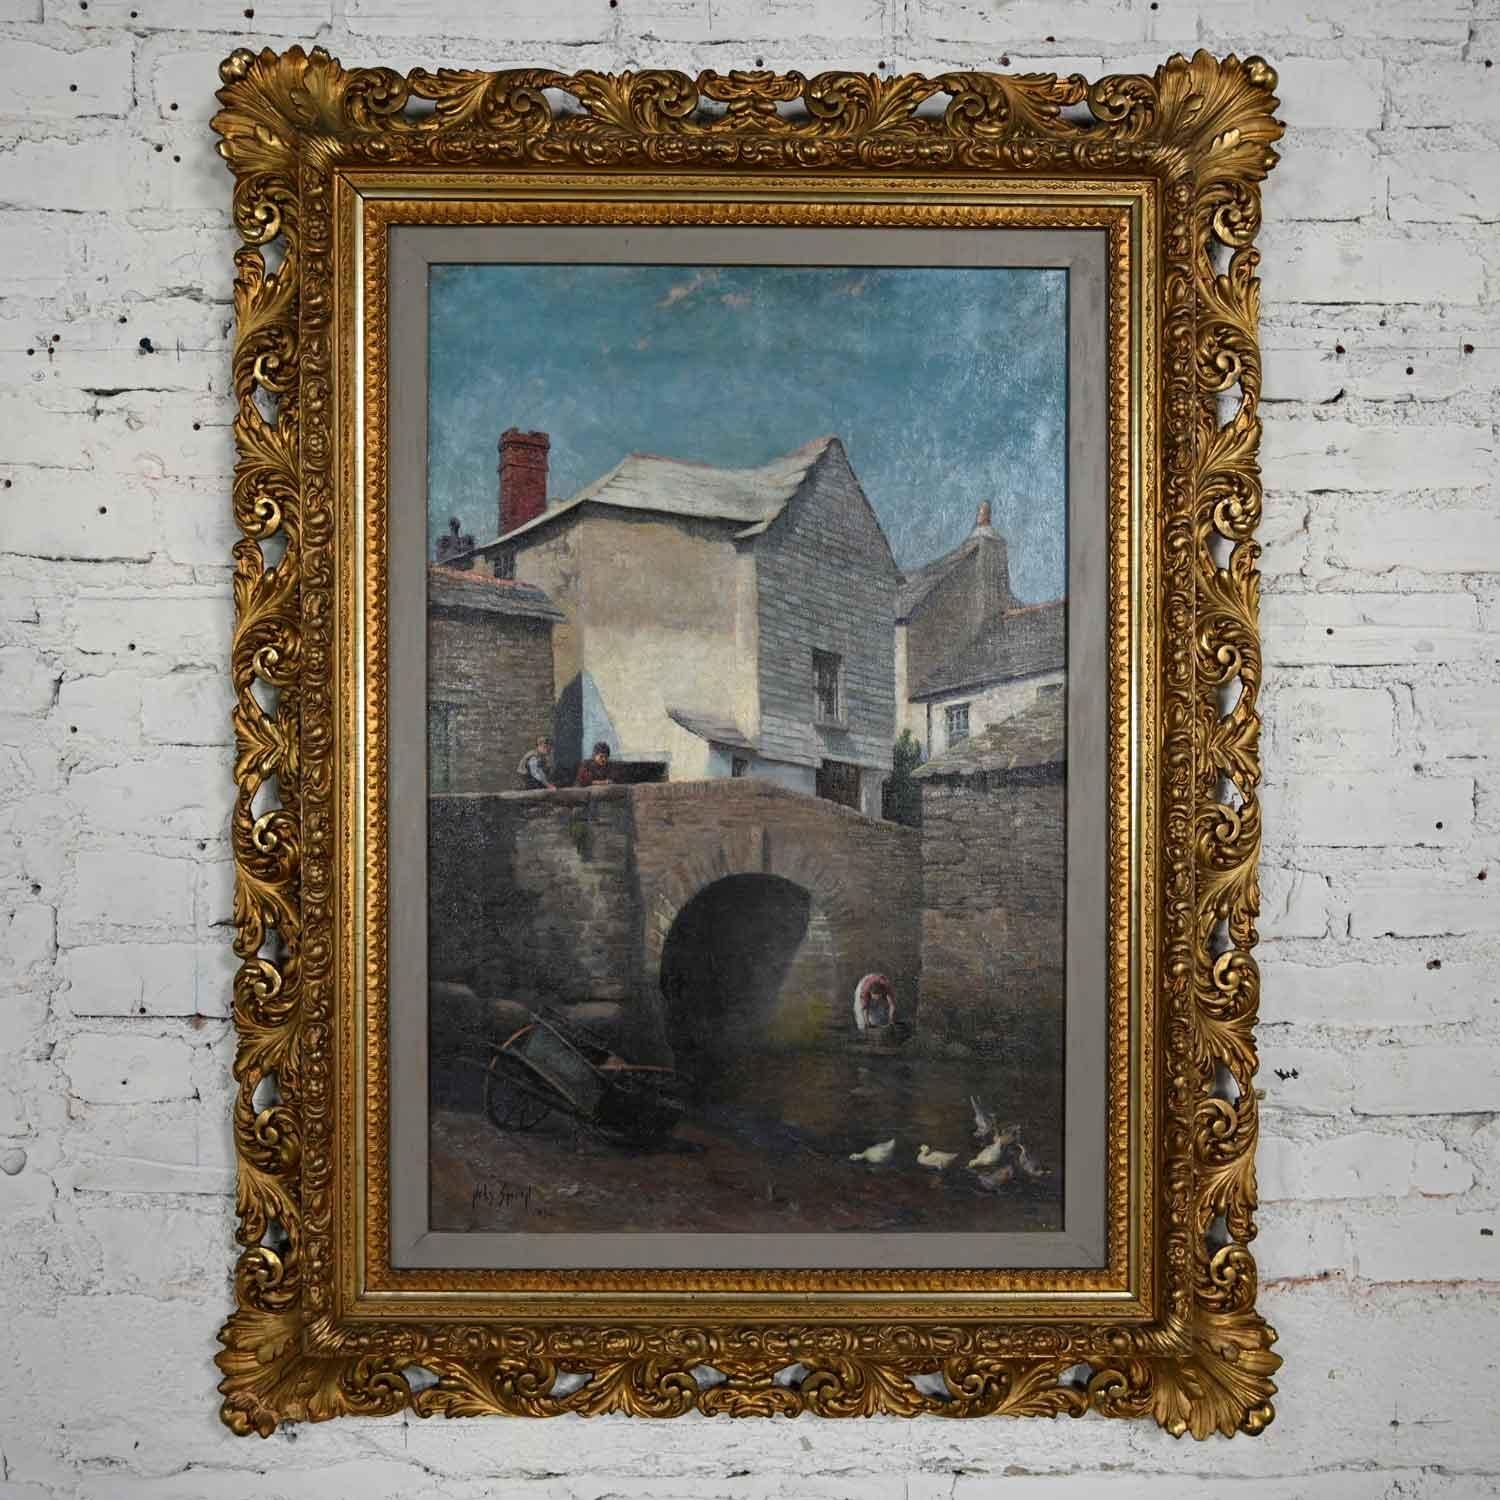 1896 Realism Landscape Oil Painting of Polperro by Hely Smith Orig Gilded Frame For Sale 1